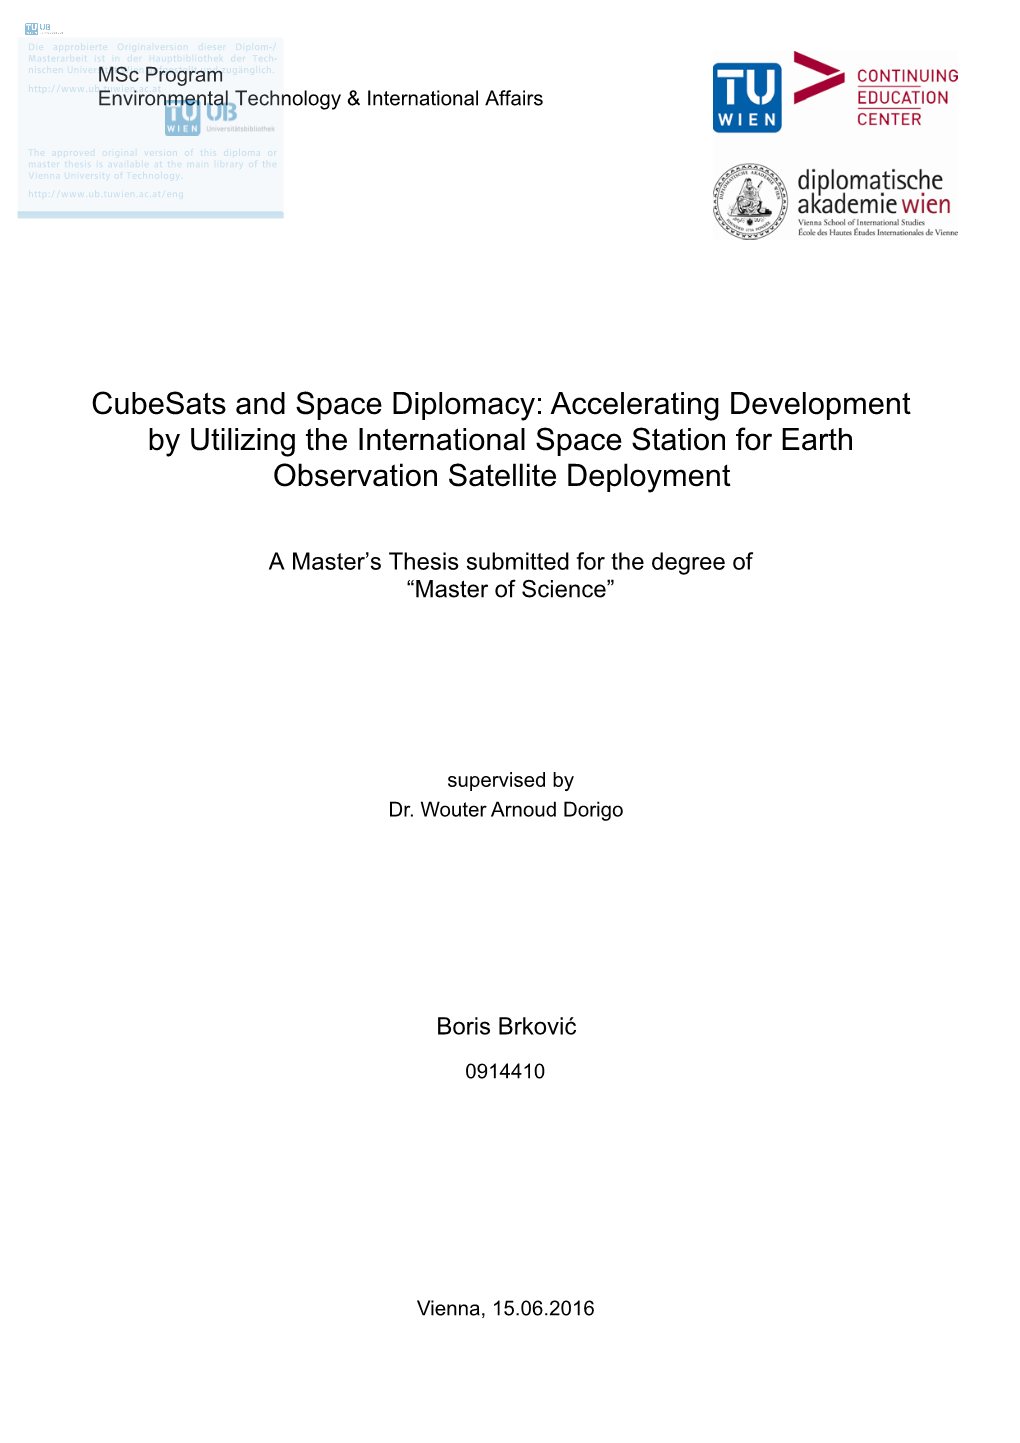 Cubesats and Space Diplomacy: Accelerating Development